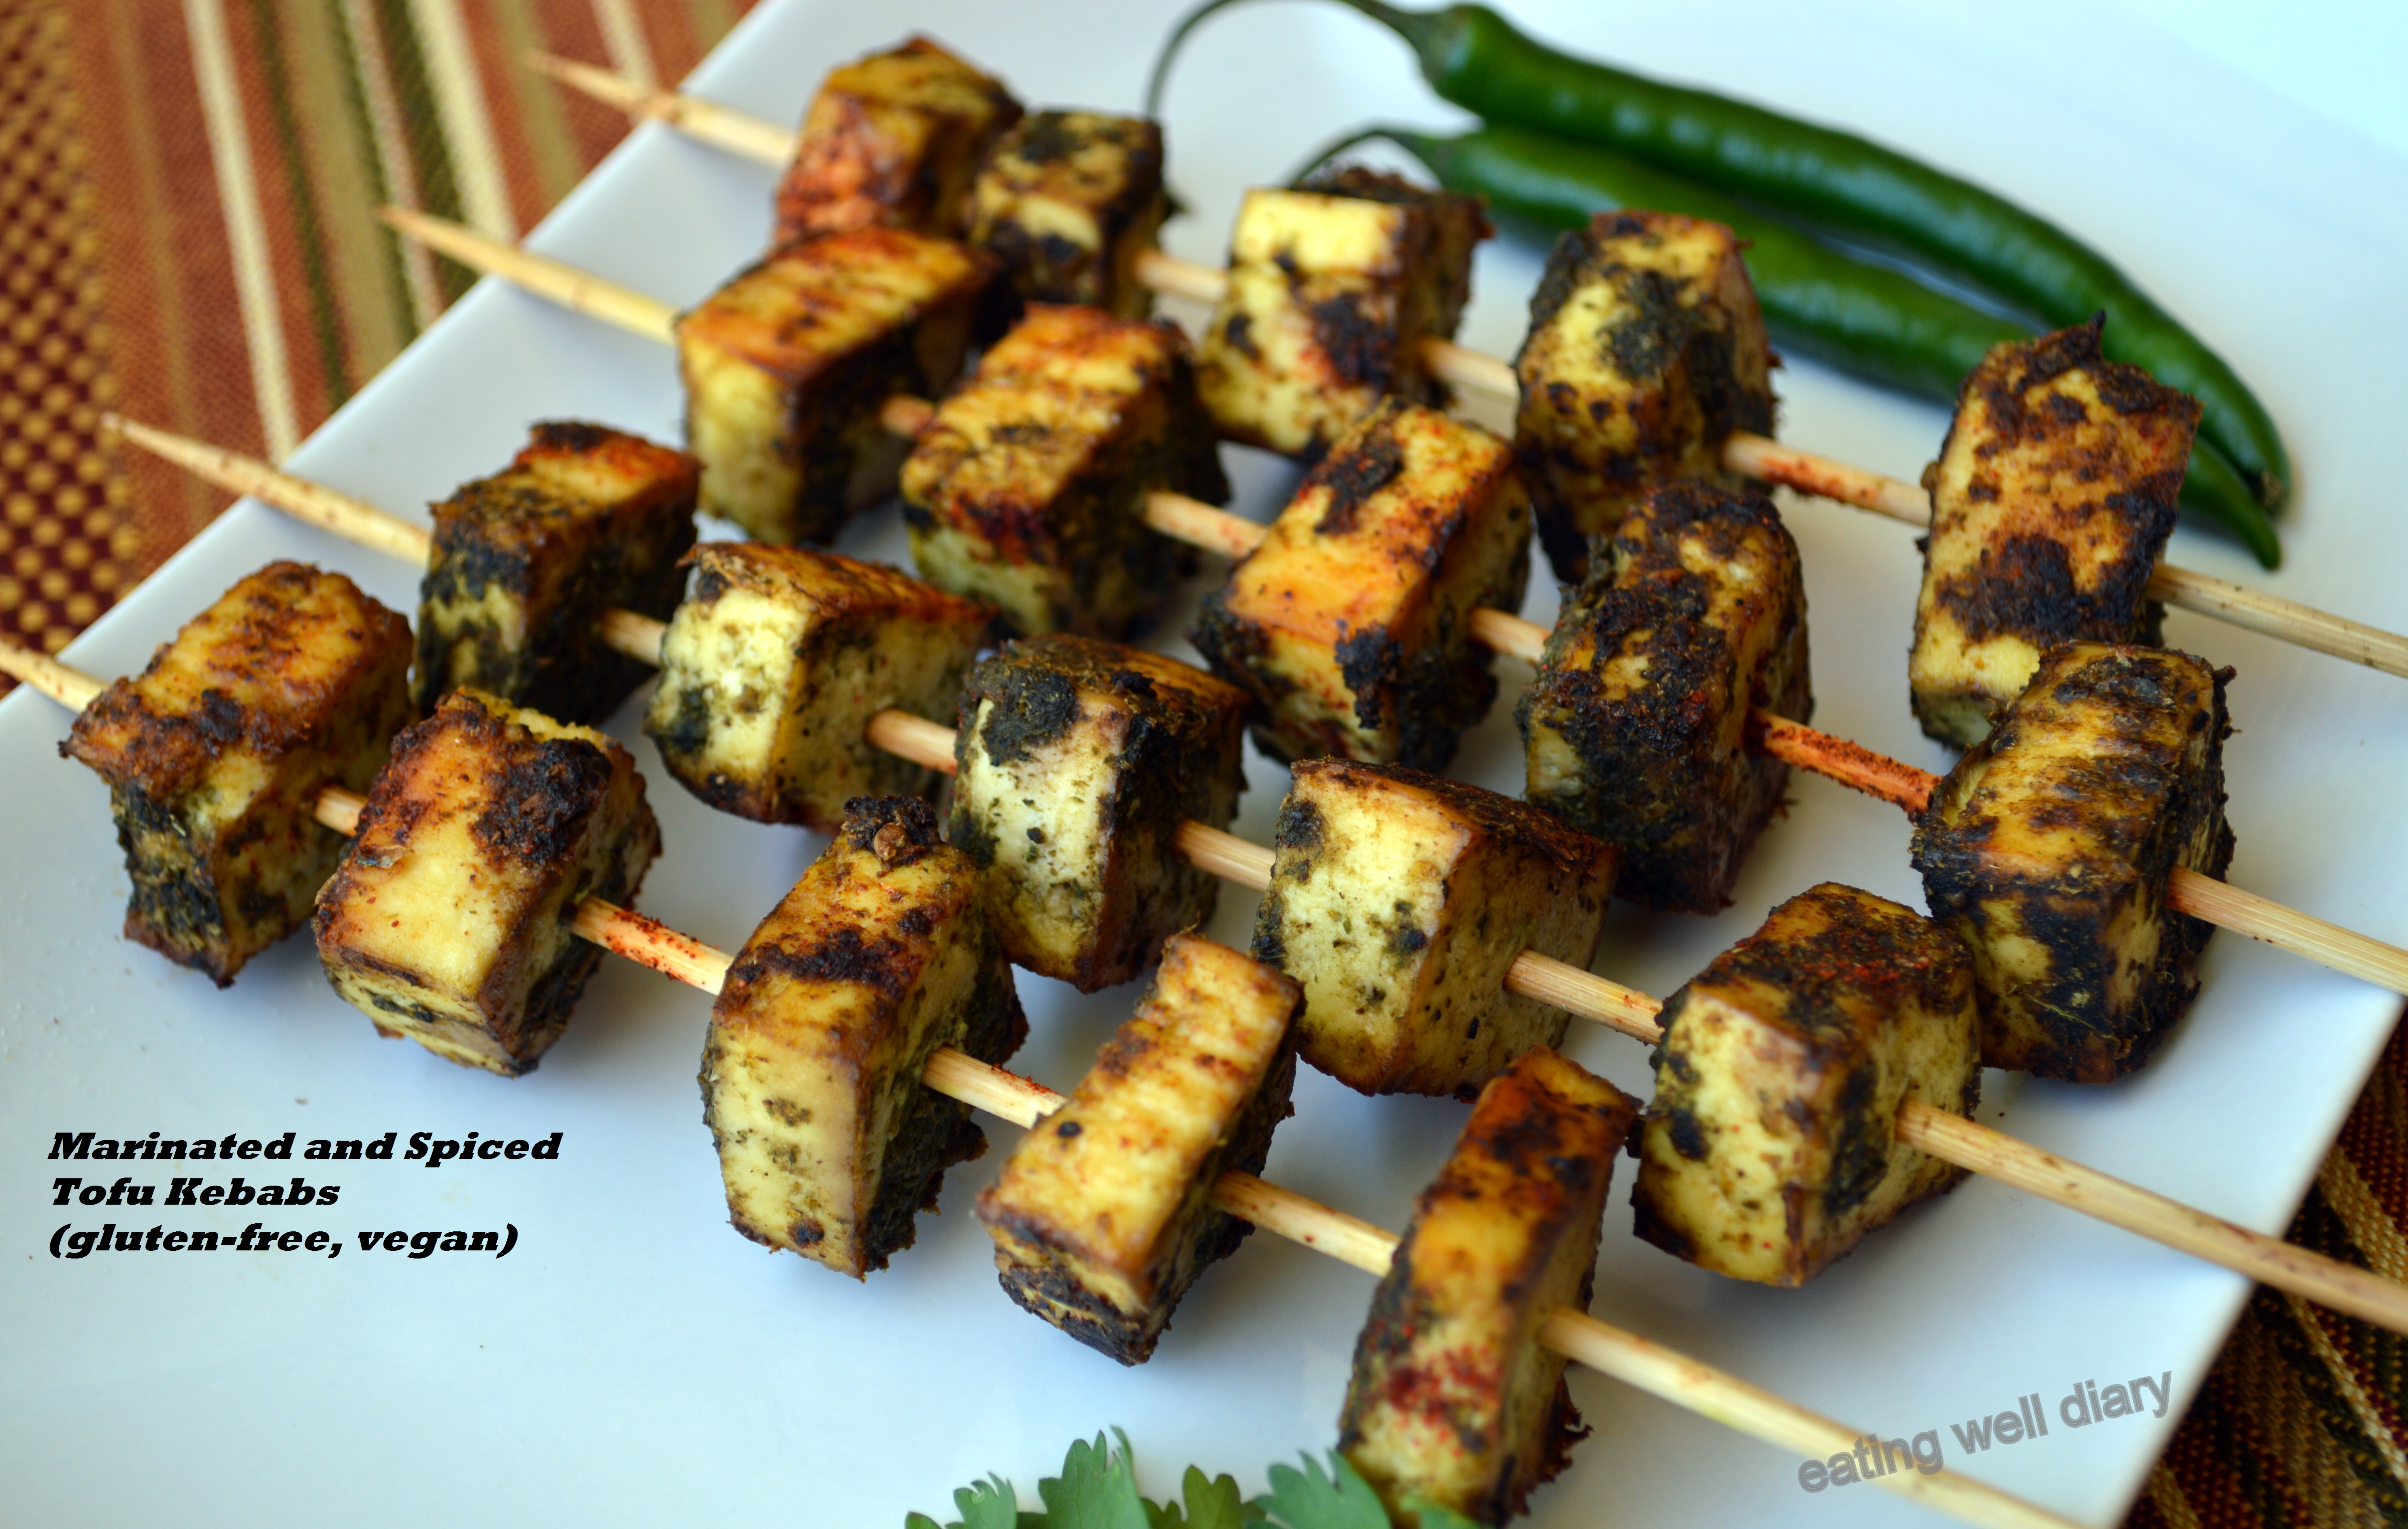 Marinated and Spiced Tofu Kebabs for Diabetic Friendly Thursdays (gluten-free, vegan)